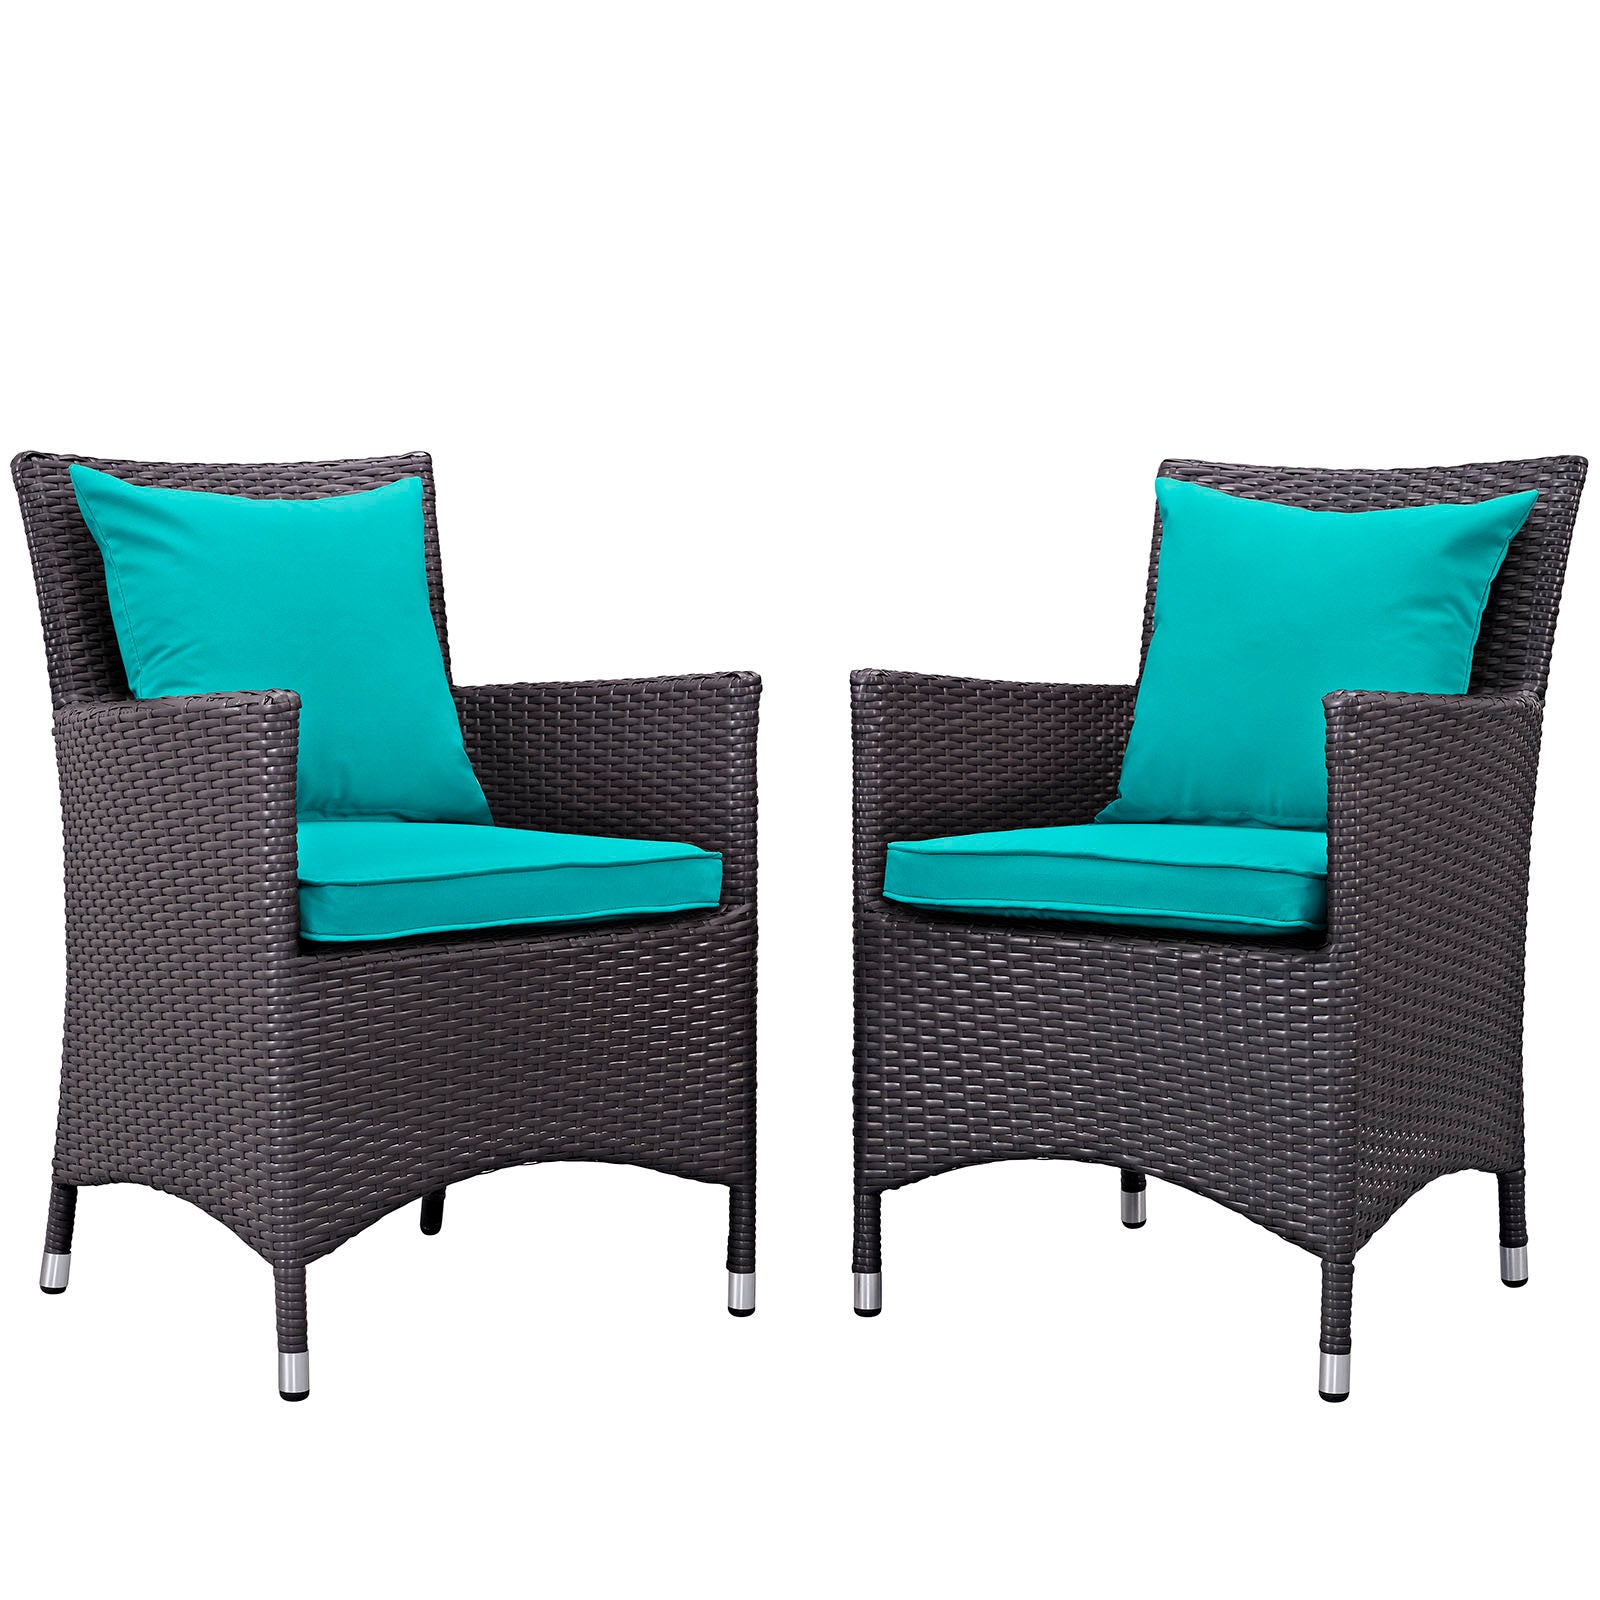 Modway Outdoor Dining Sets - Convene 2 Piece Outdoor Patio Dining Set Espresso Turquoise